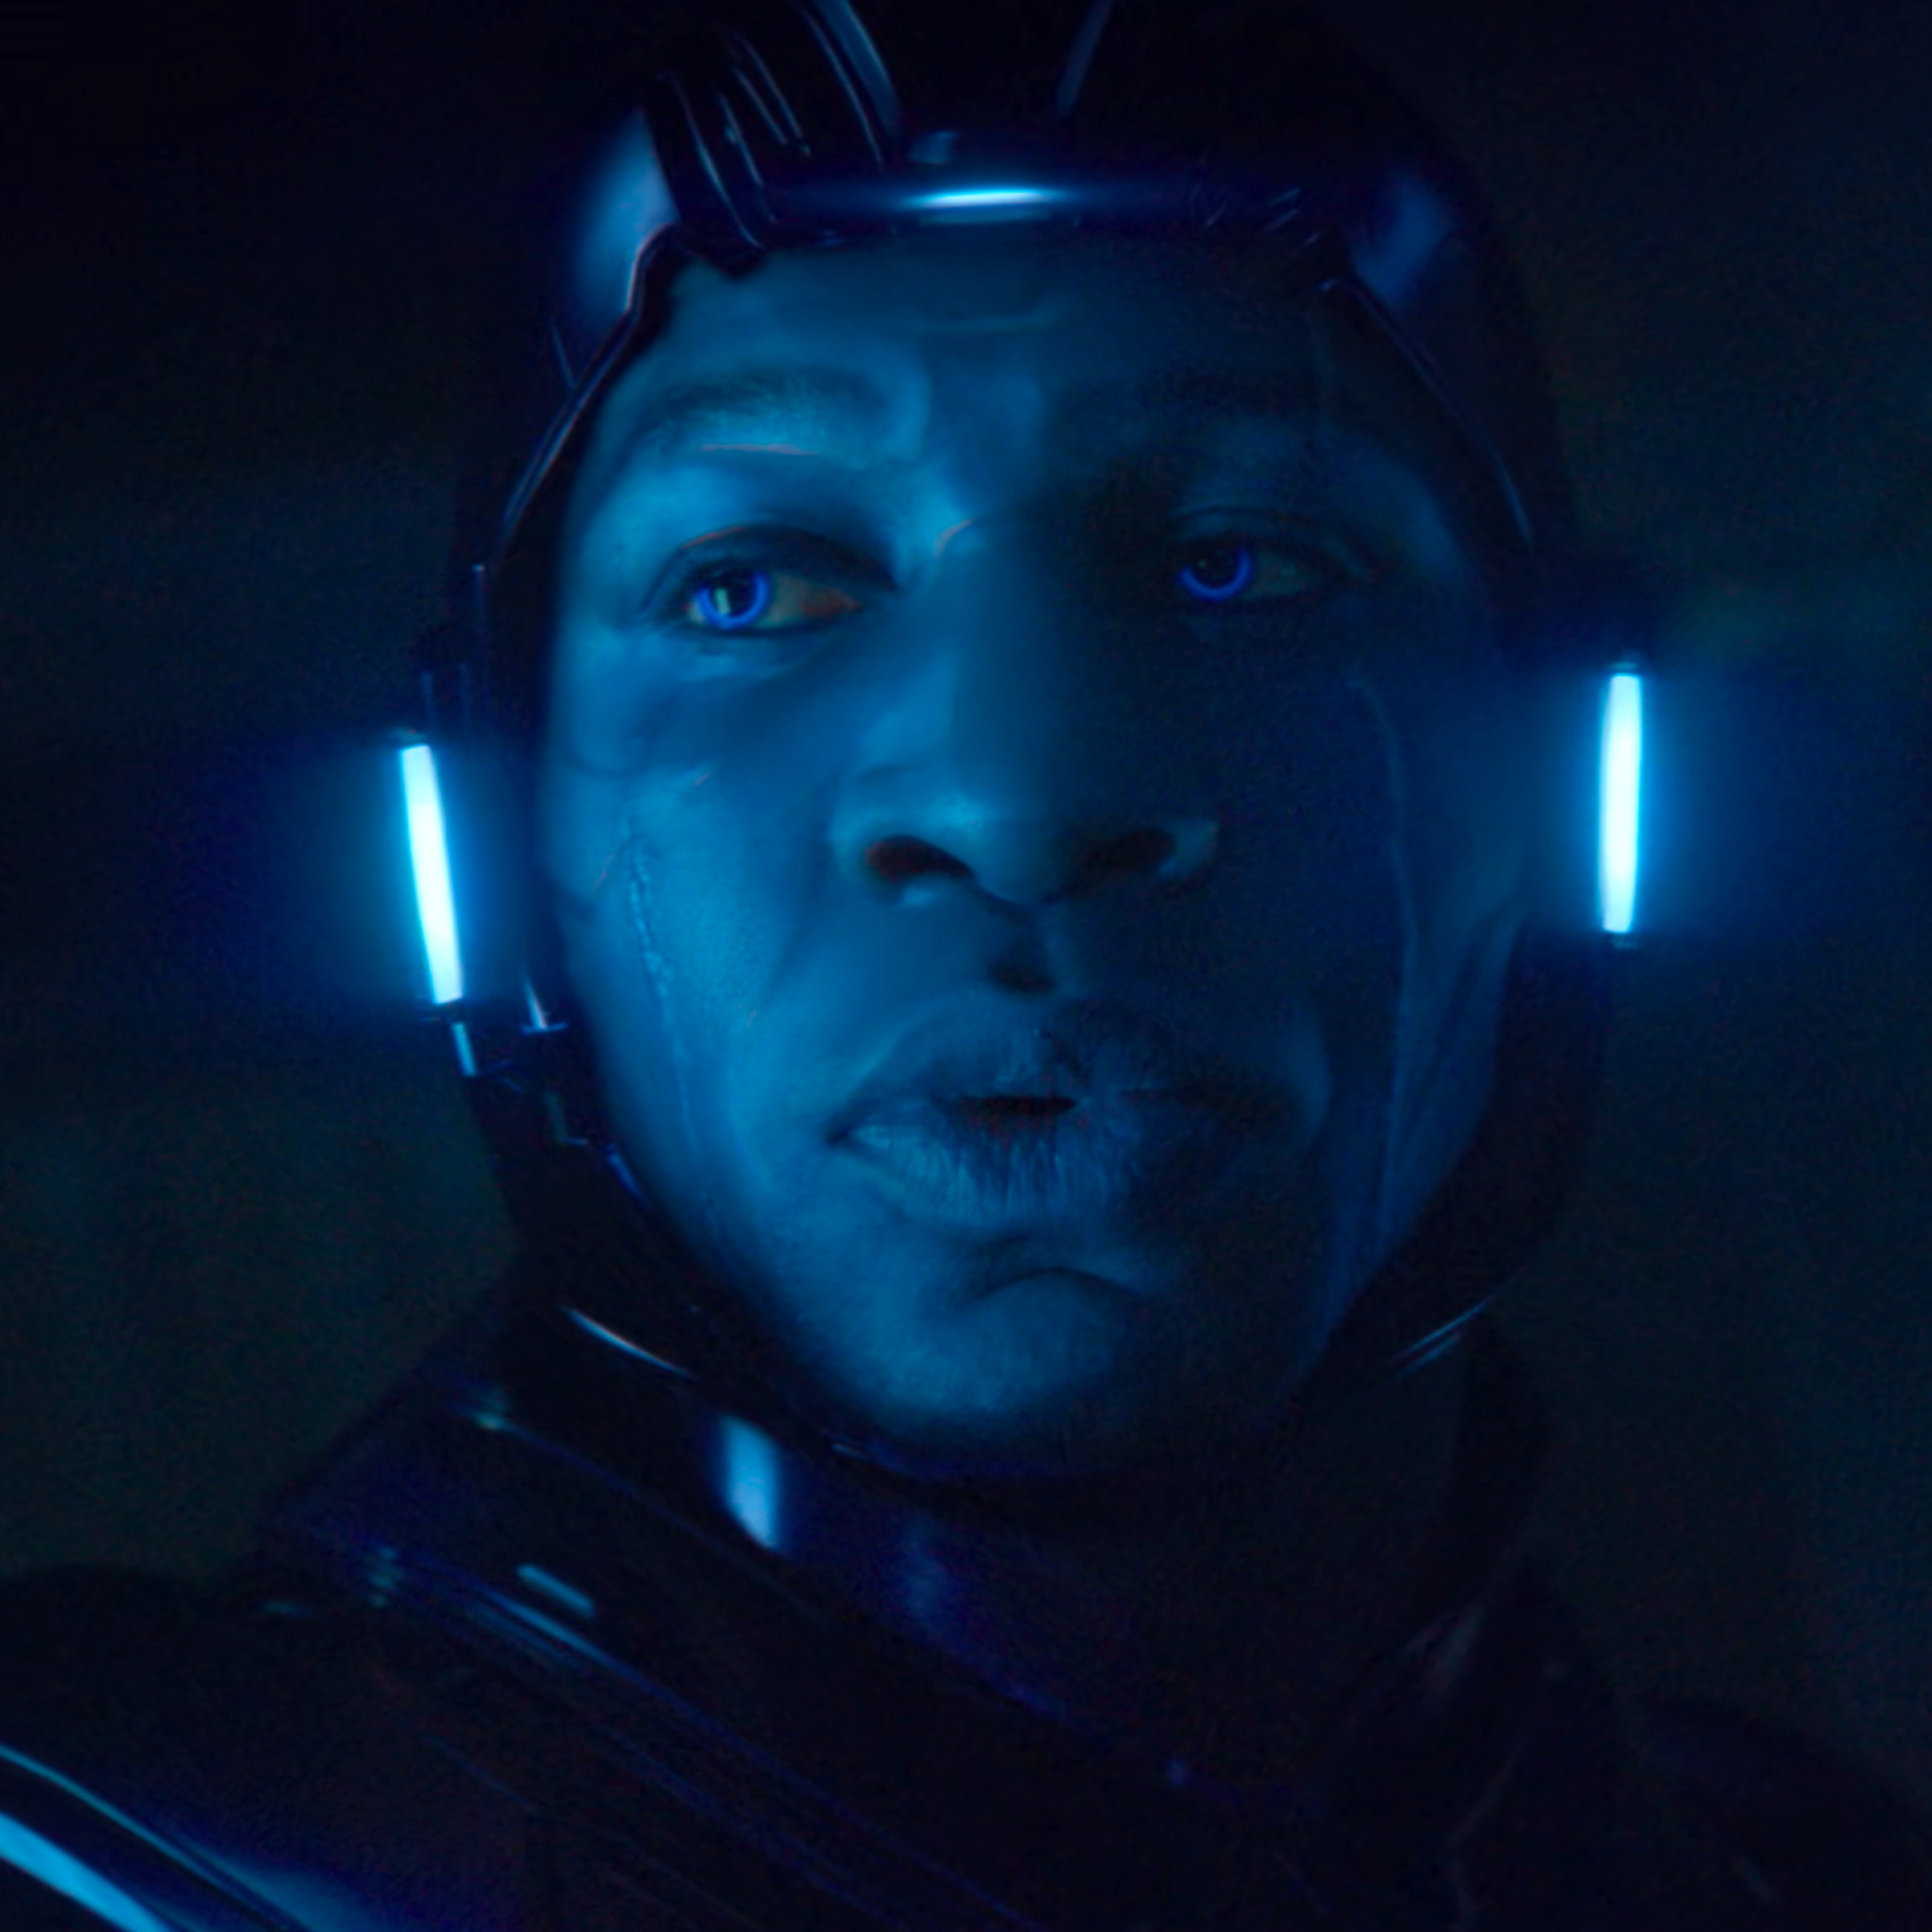 A tight shot of a man wearing a formfitting helmet that casts a translucent blue sheen over his face, which is visible from his hairline down to his chin.